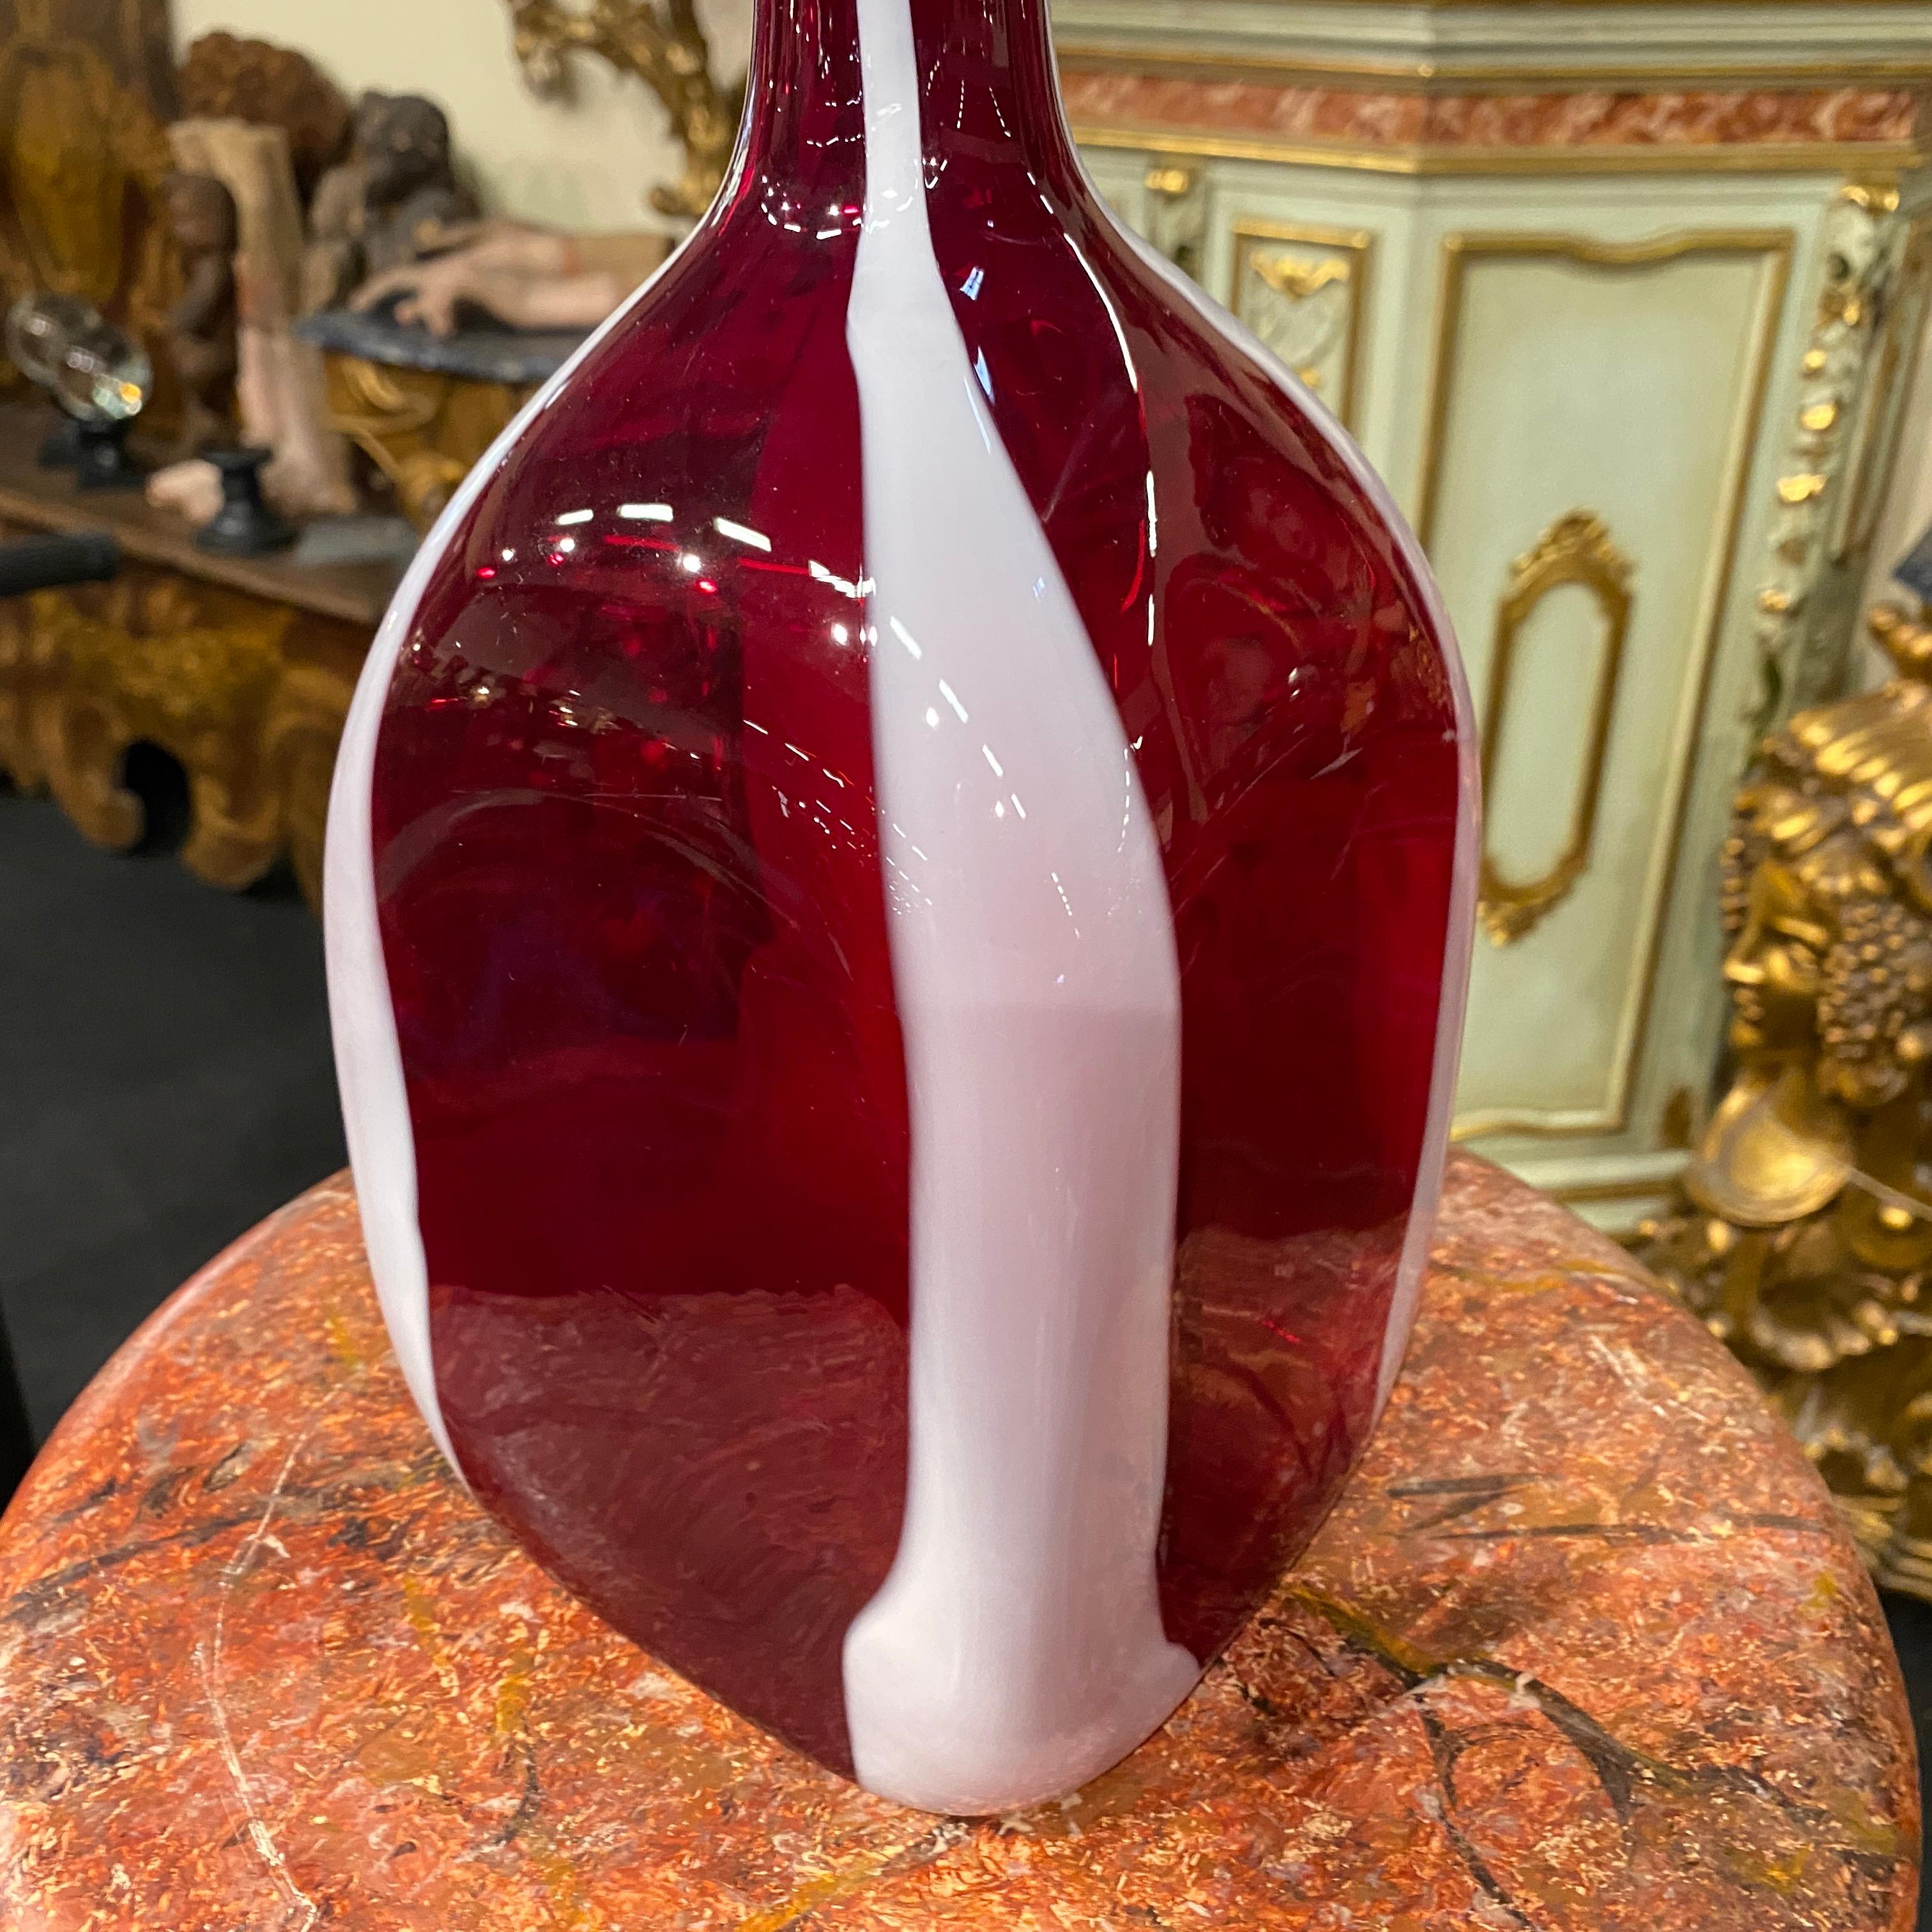 A rare red and white murano glass bottle vase designed and manufactured in Italy in the Eighties, it's in perfect conditions.
This Vase by Carlo Moretti would embody the design sensibilities of the 1980s while showcasing the traditional